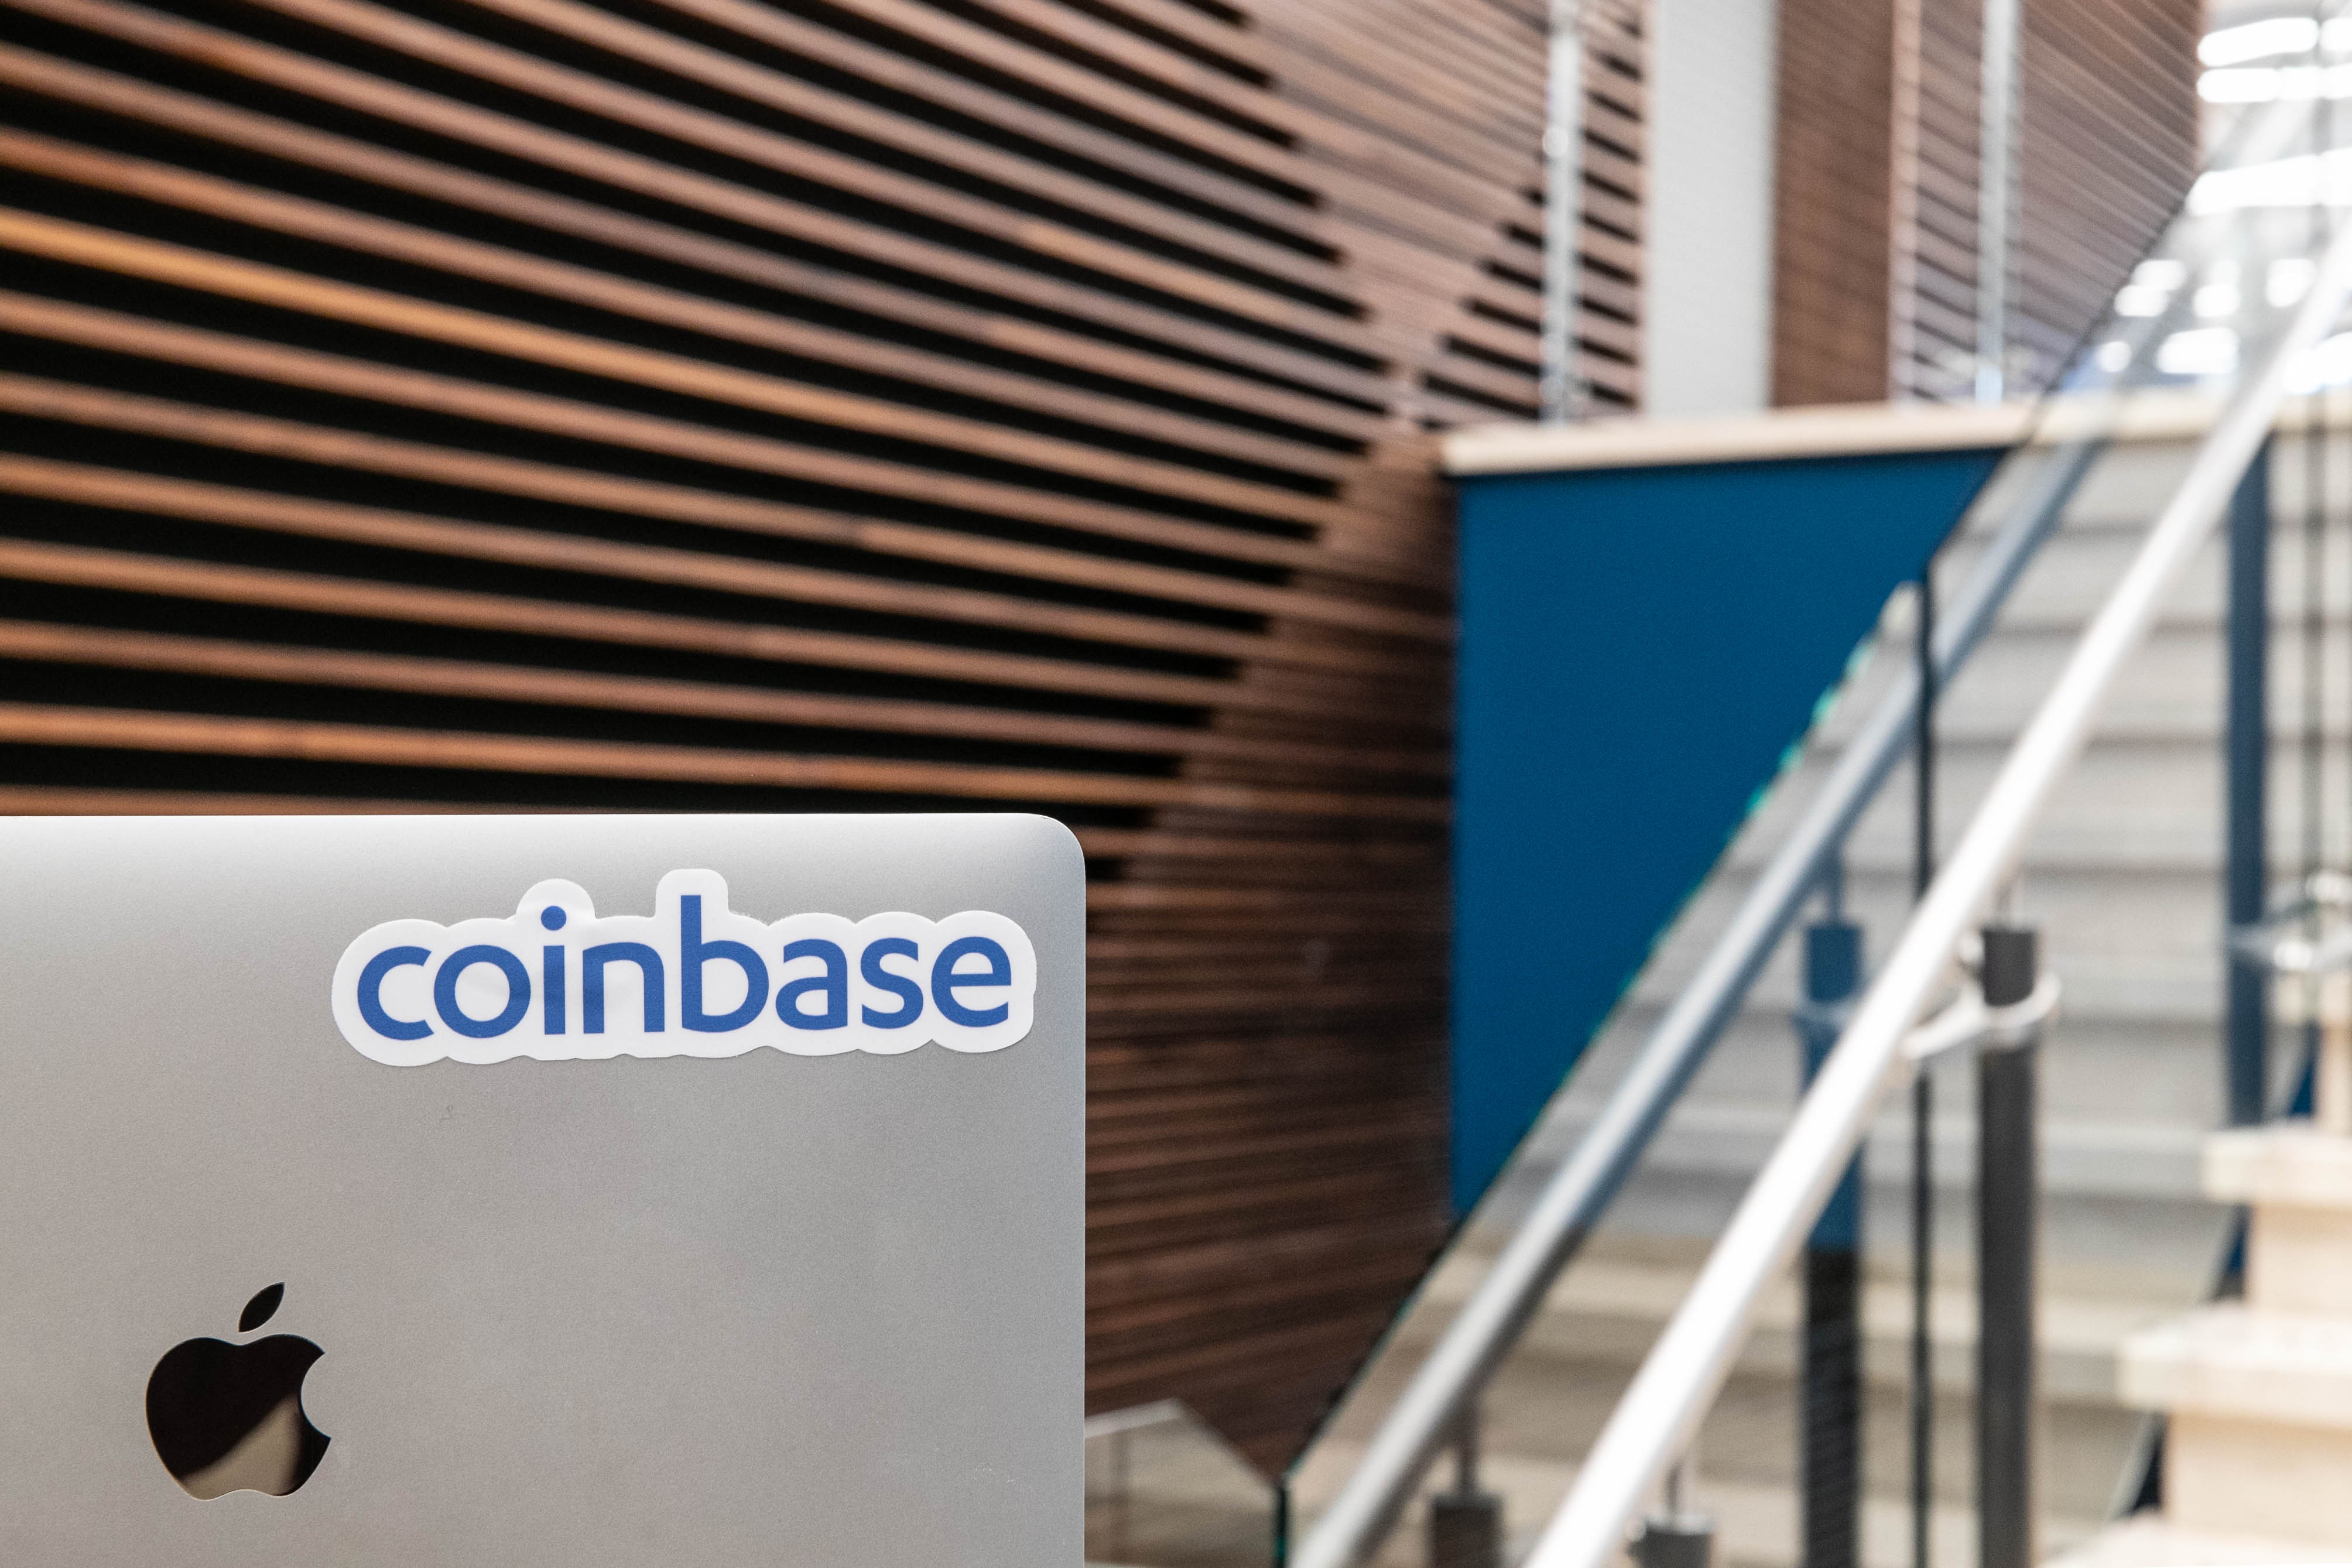 Why This Investor Bought Coinbase Stock Following Pullback